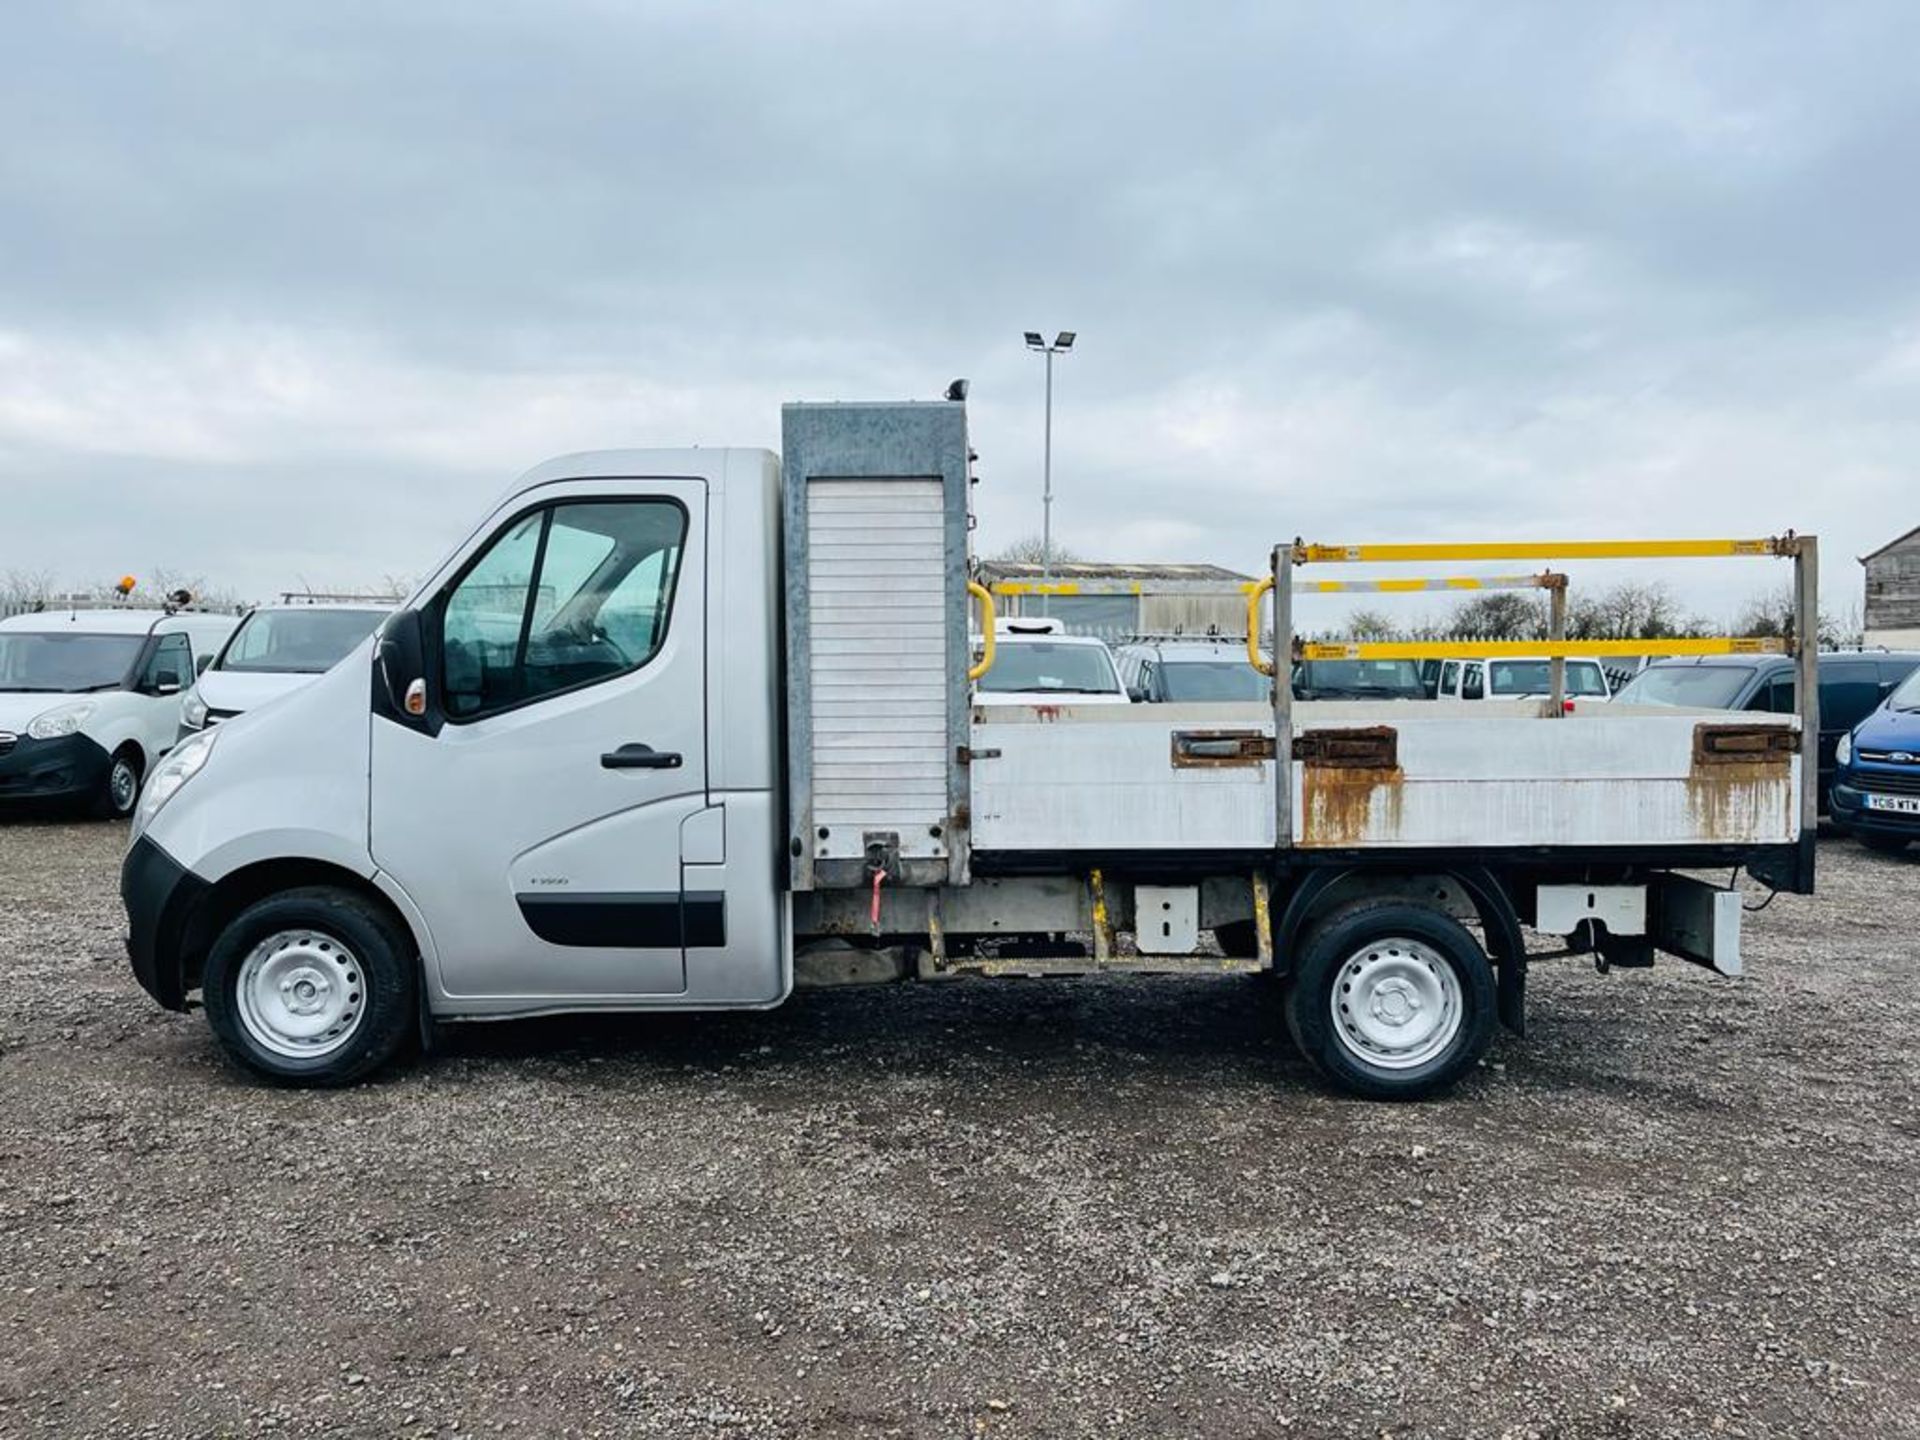 **ON SALE** Vauxhall Movano 2.3 CDTI BlueInjection F3500 L2 Dropside Alloy Body 2017 '67 Reg' - Image 4 of 19